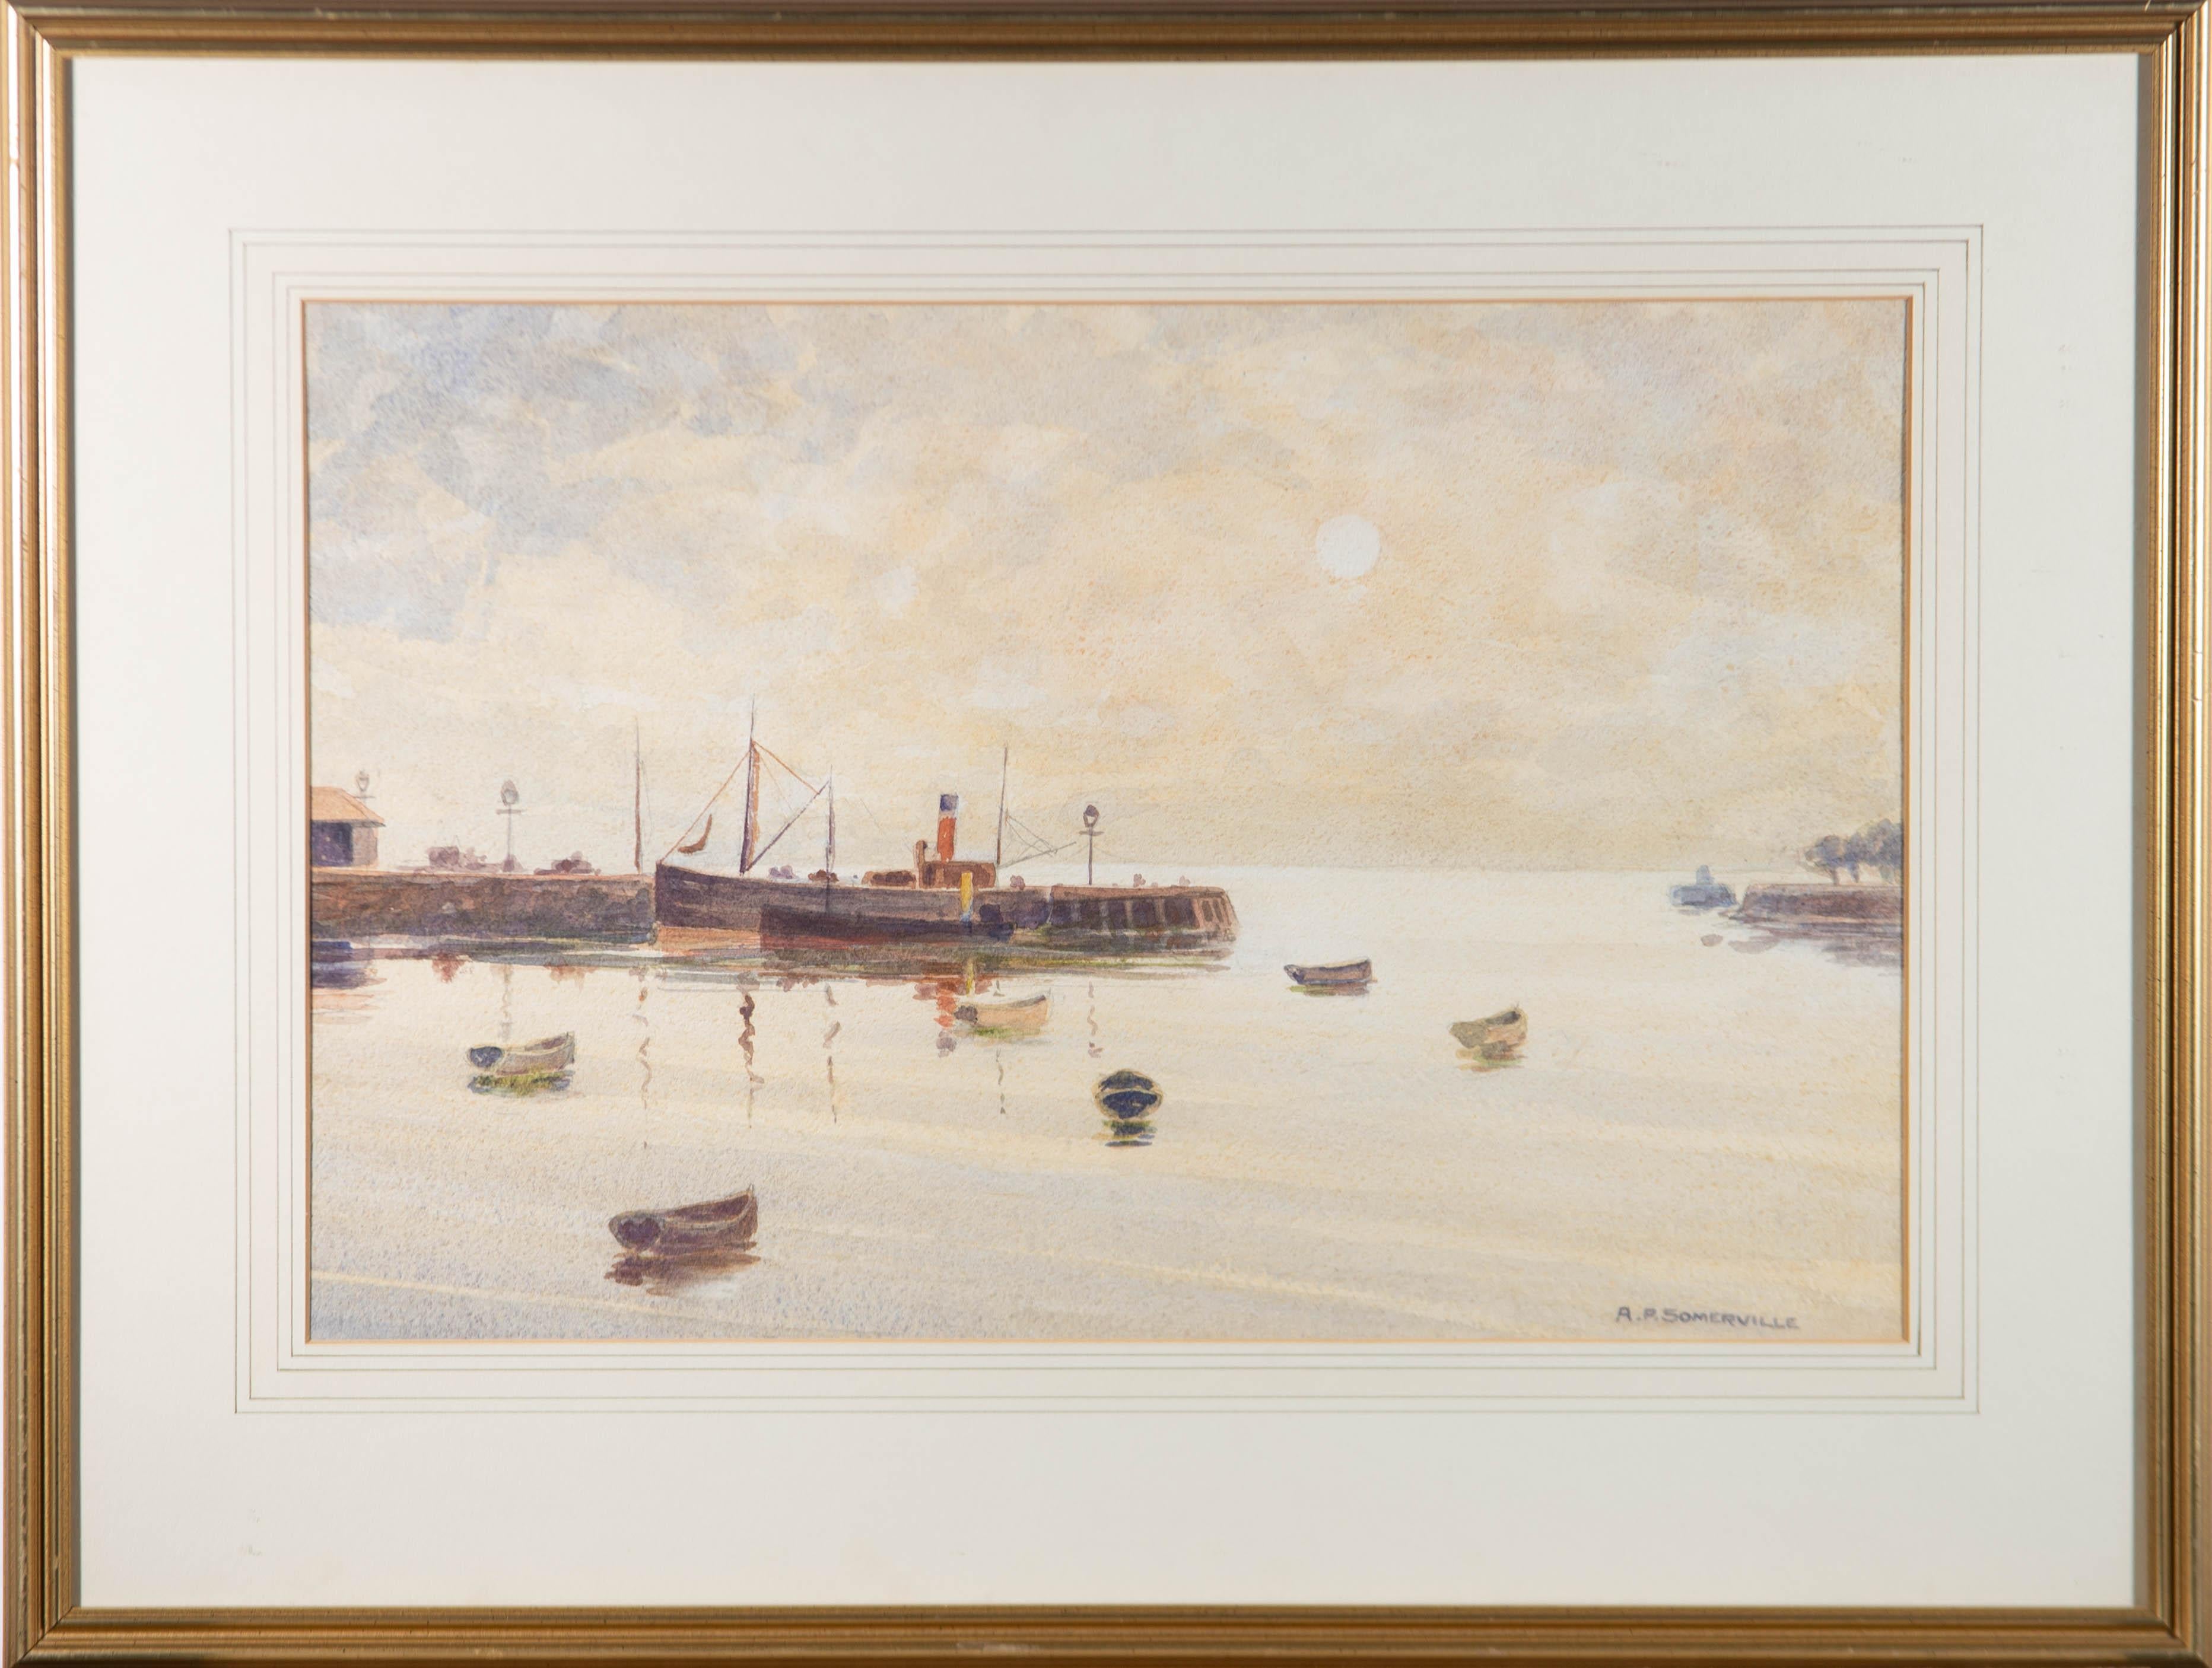 A charming watercolour painting by A.P. Somerville, depicting a view of an estuary with boats. There is a label on the reverse inscribed with the artist's name and title. Signed to the lower right-hand corner. Well-presented in a wash line card